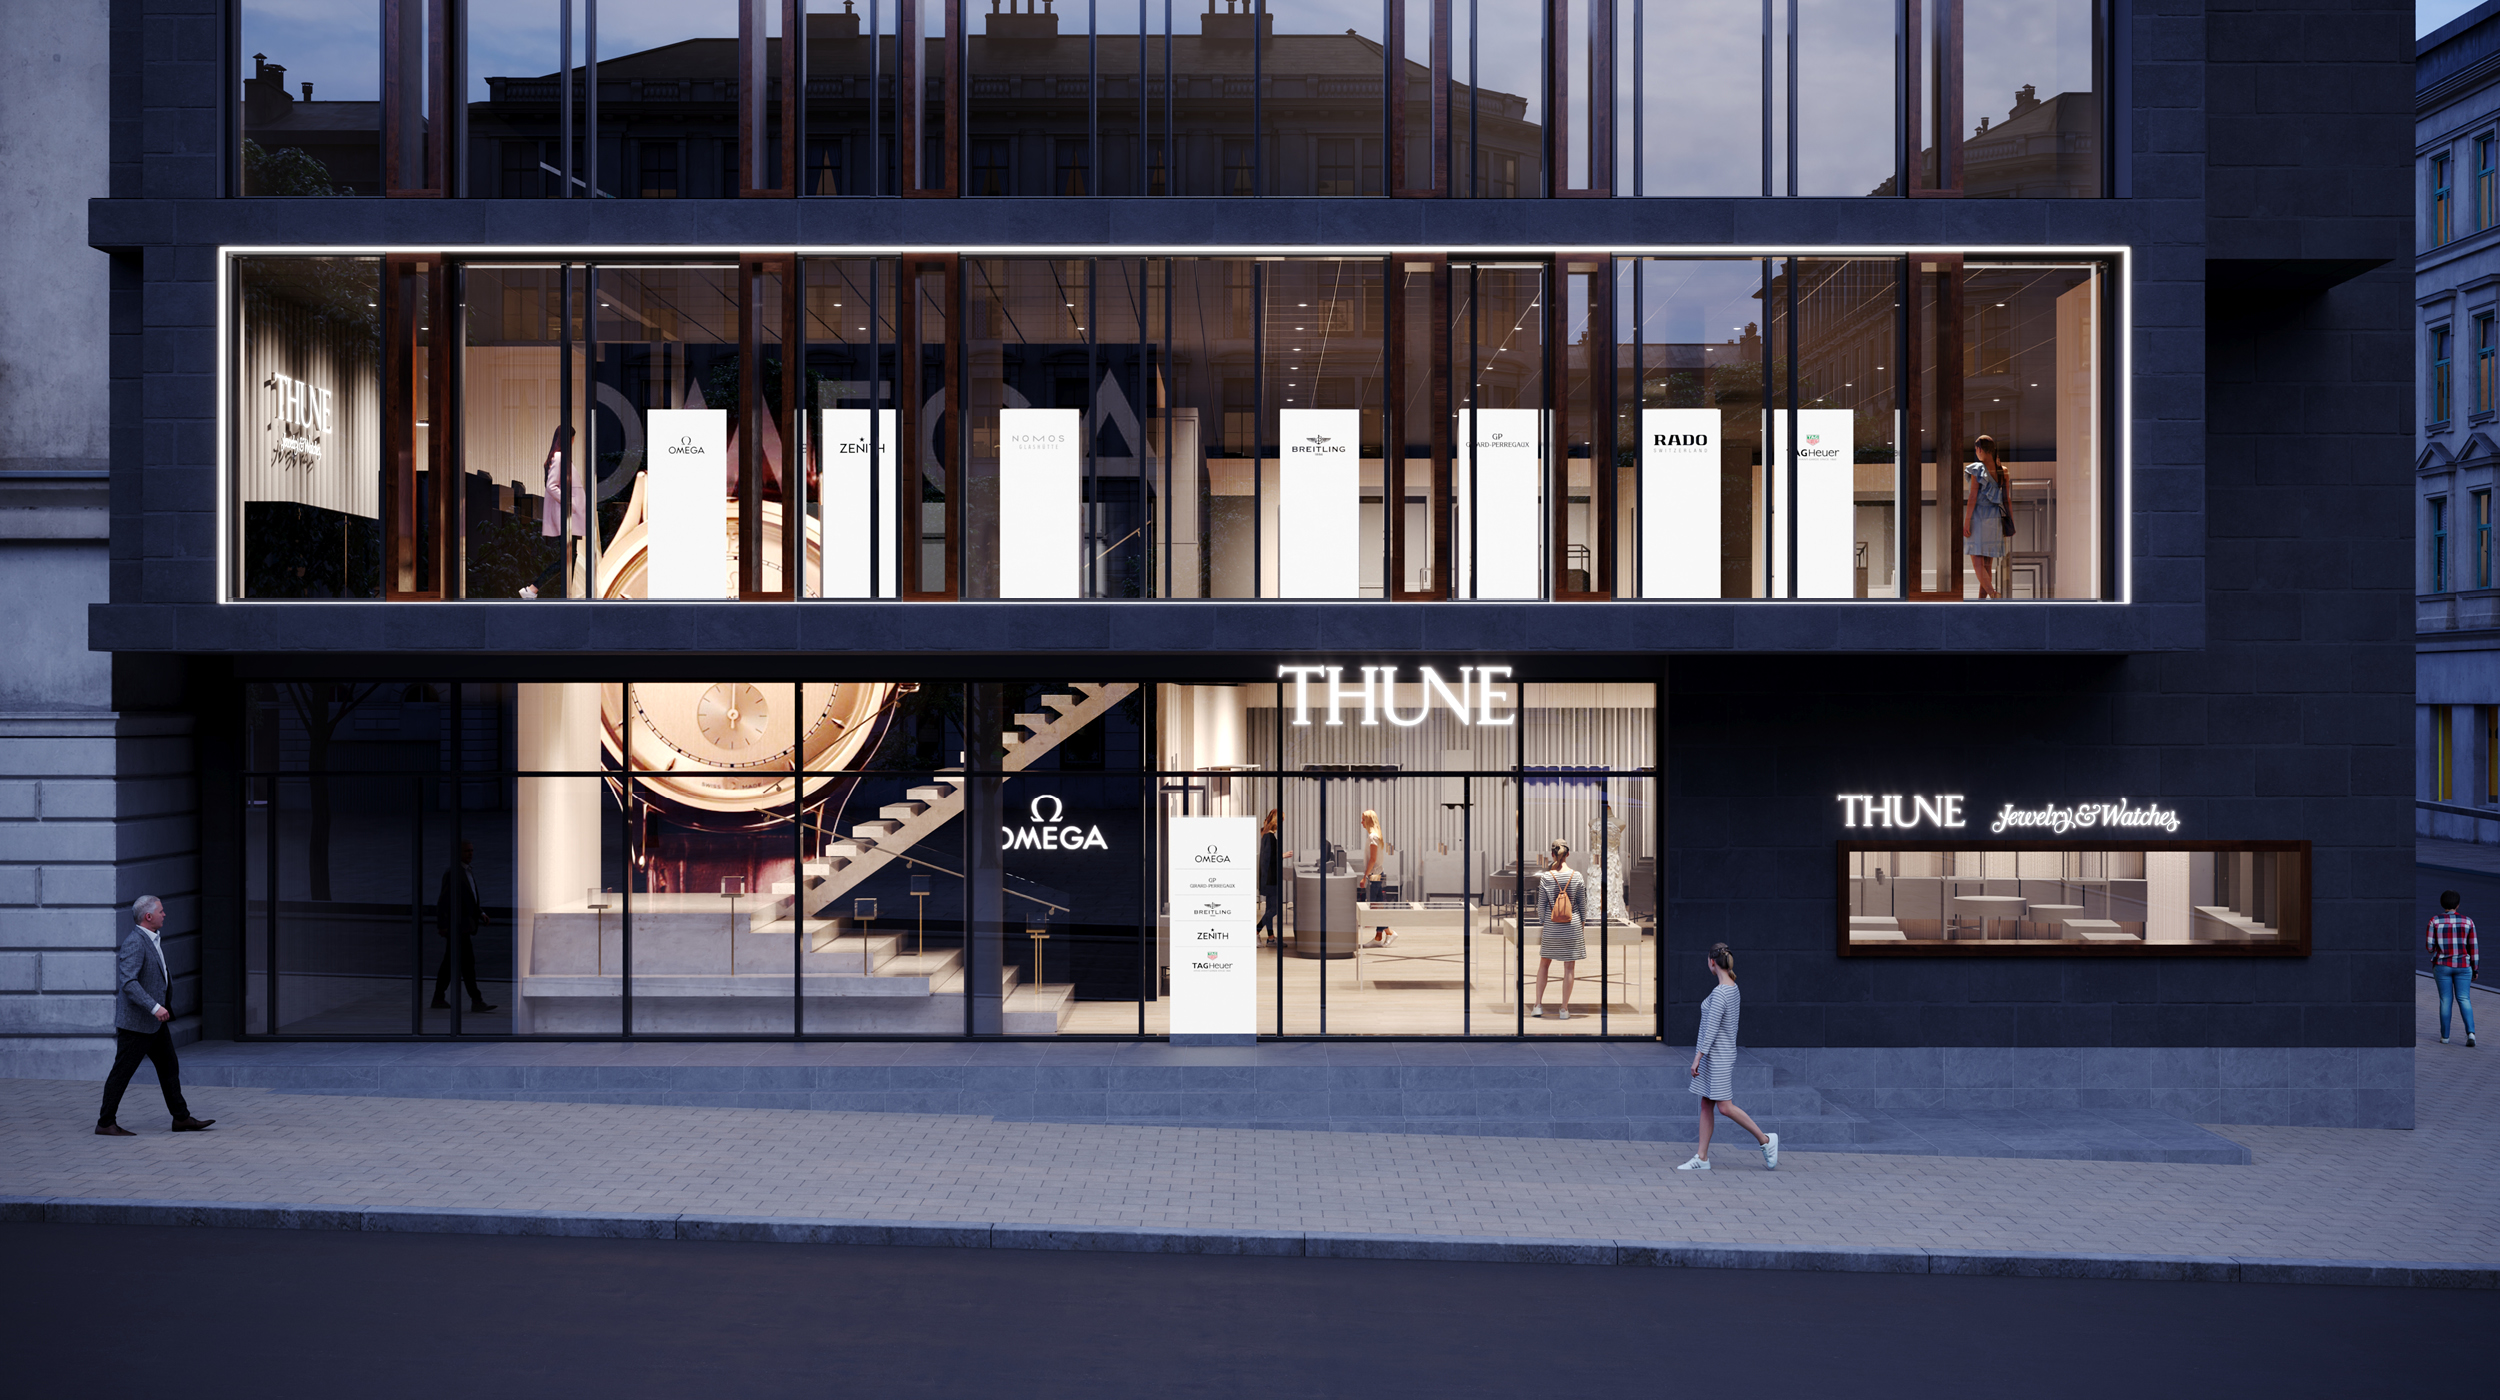 Creating the largest concept boutique for fine jewellery and watches in the Nordics